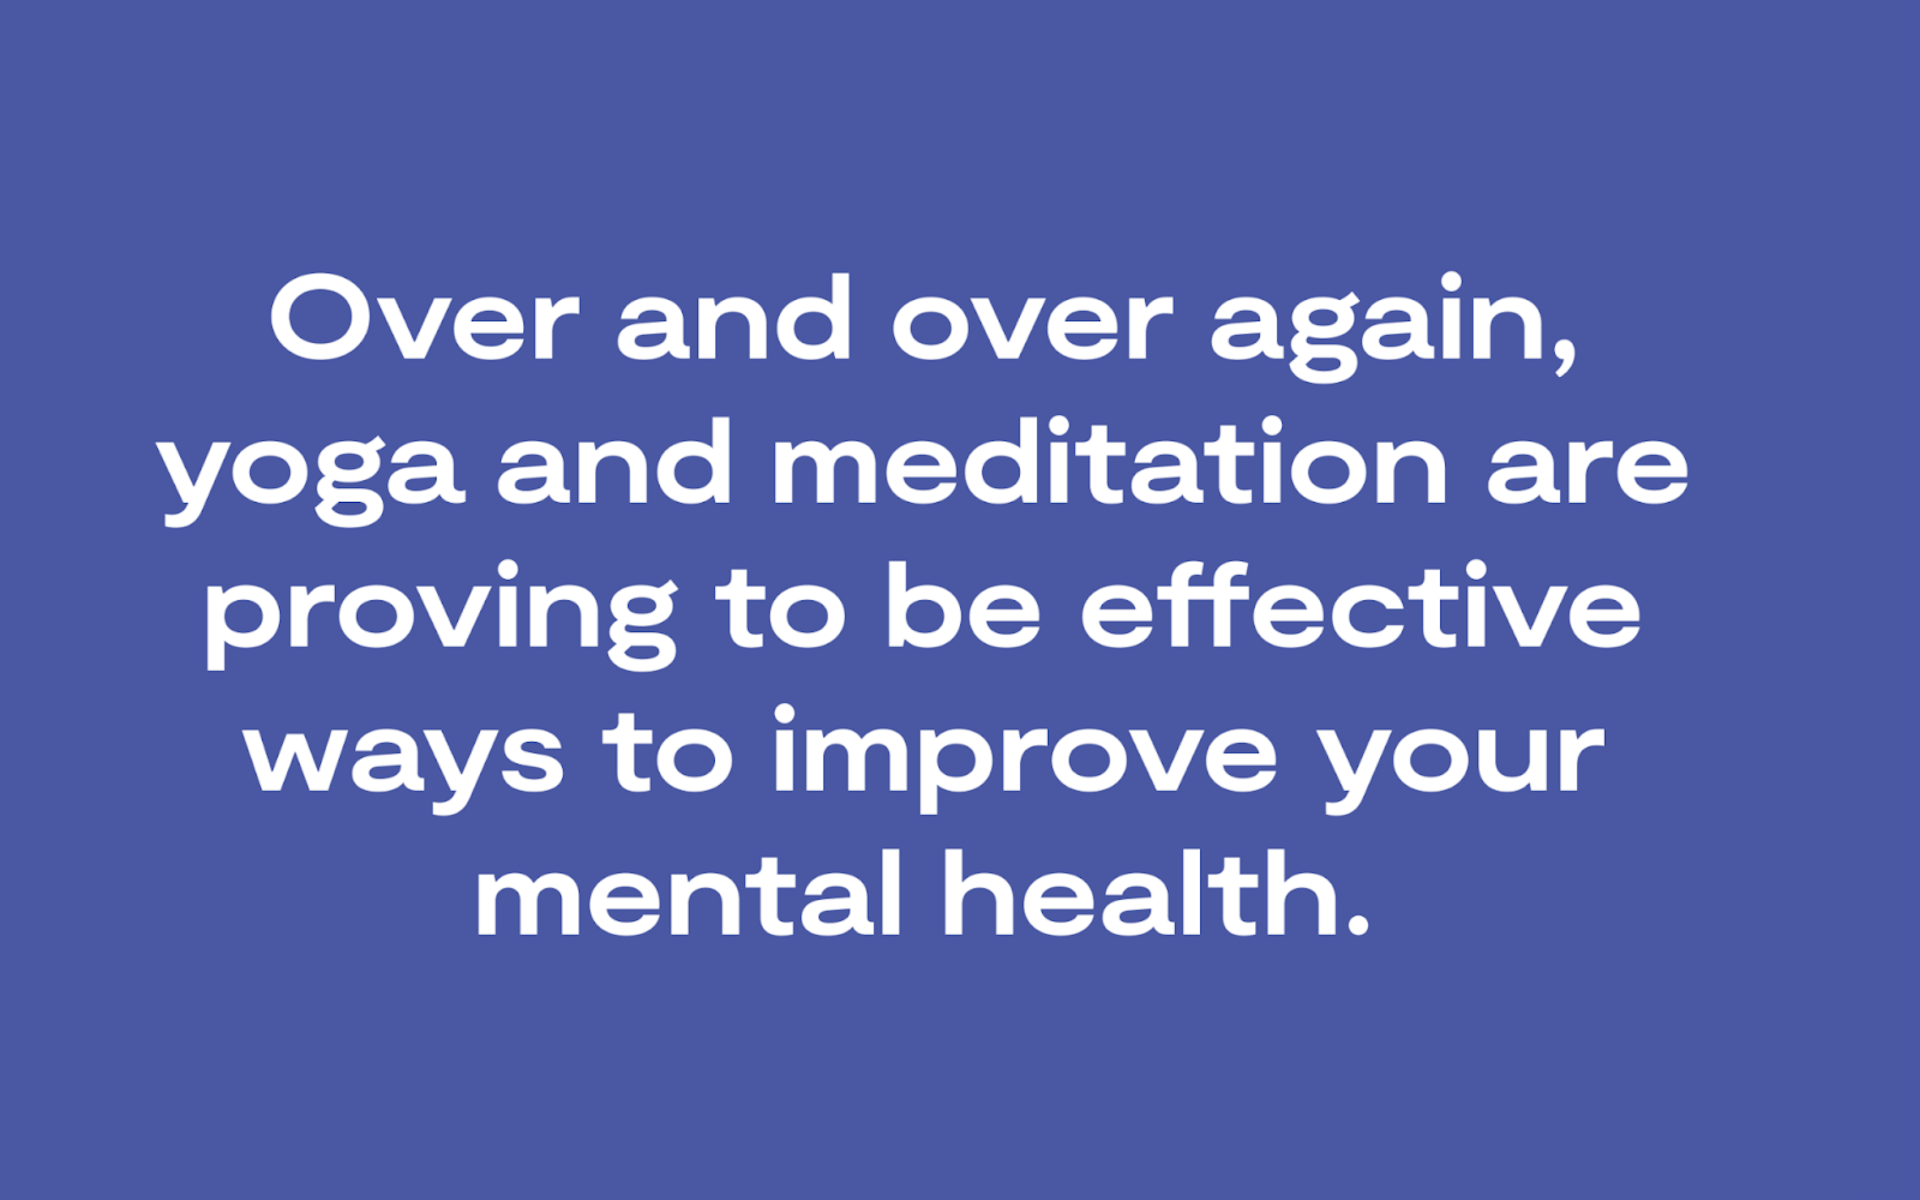 Over and over again, yoga and meditation are proving to be effective ways to improve your mental health.